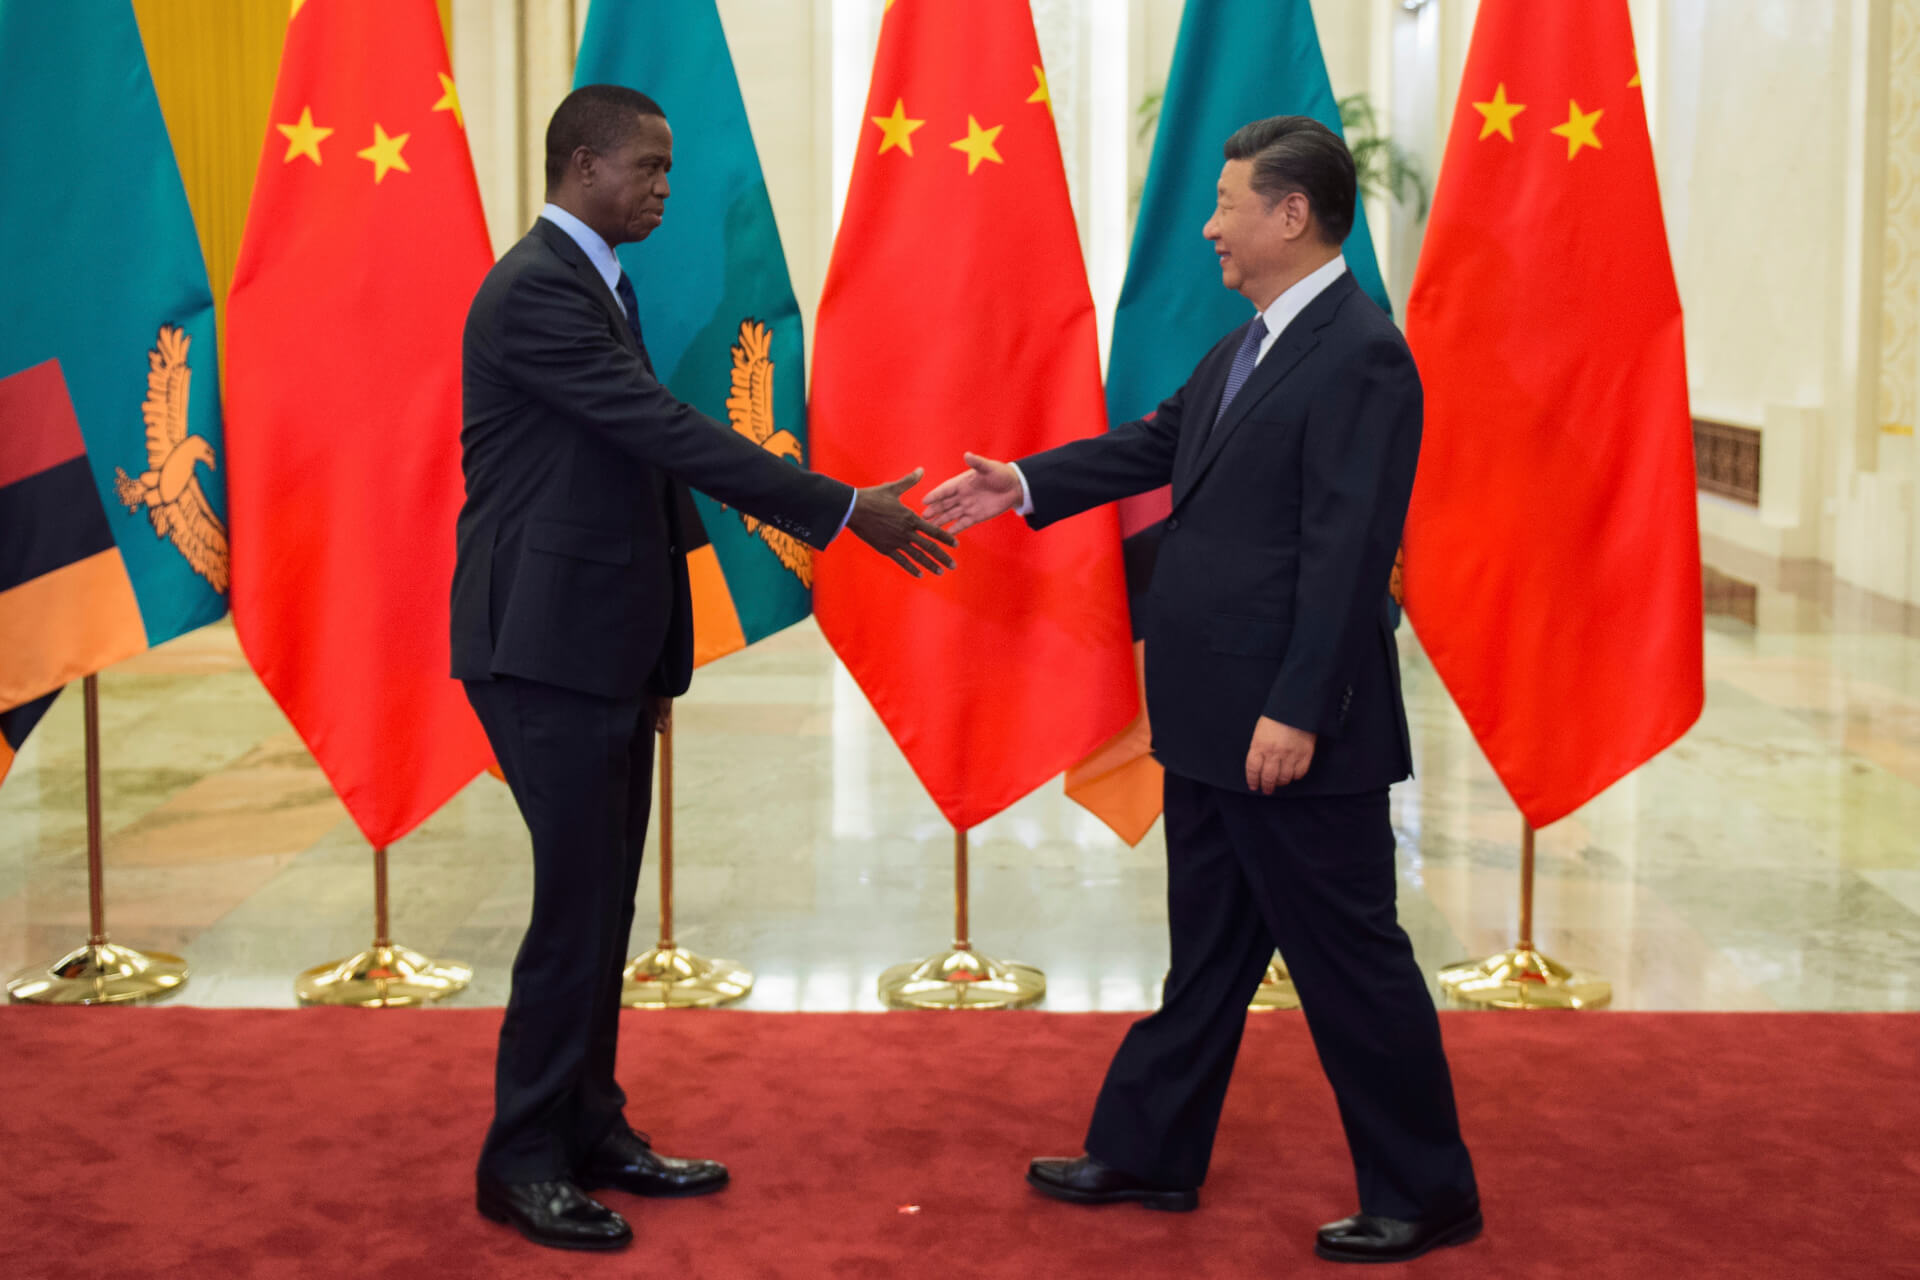 Zambia Asks China for Debt Cancellation, Reiterates Support for ‘One China Policy’